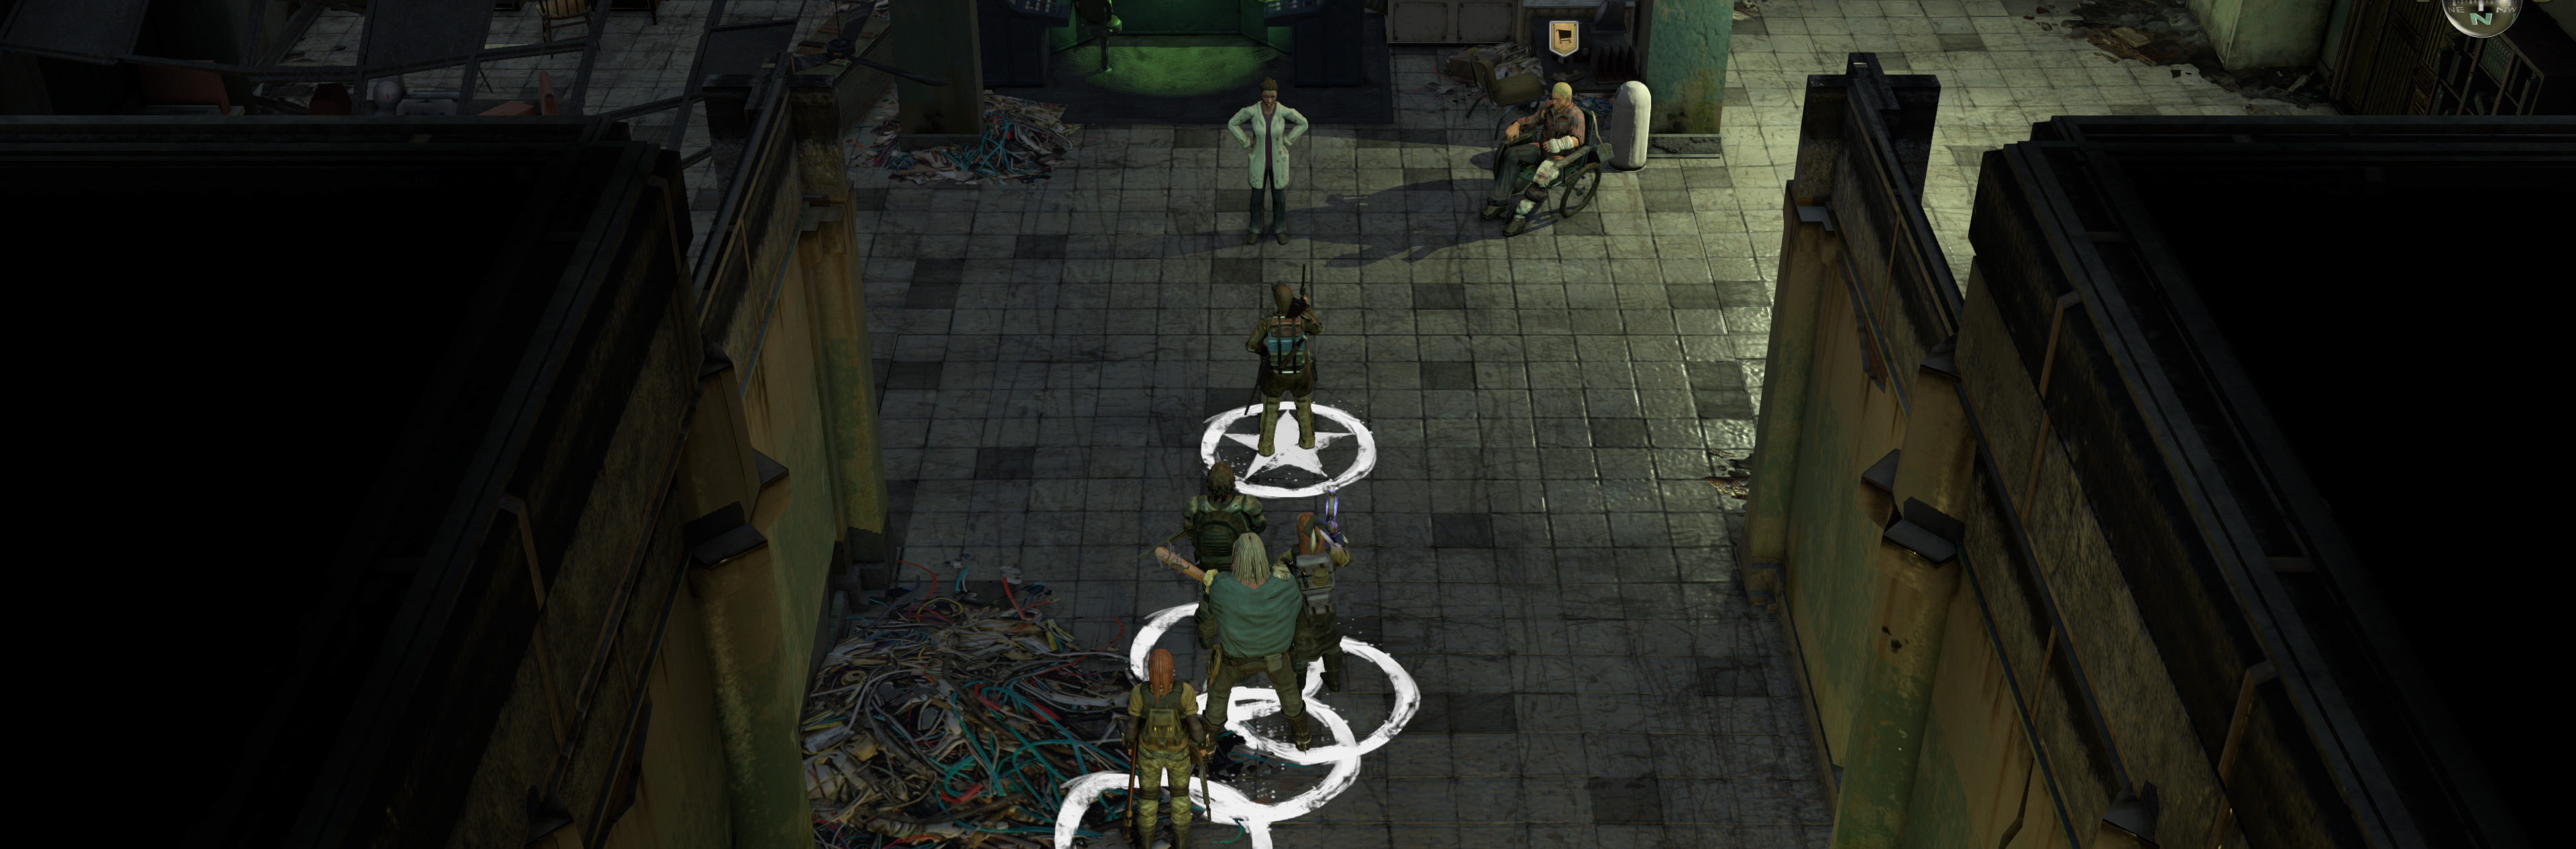 Wasteland 2 characters in-game